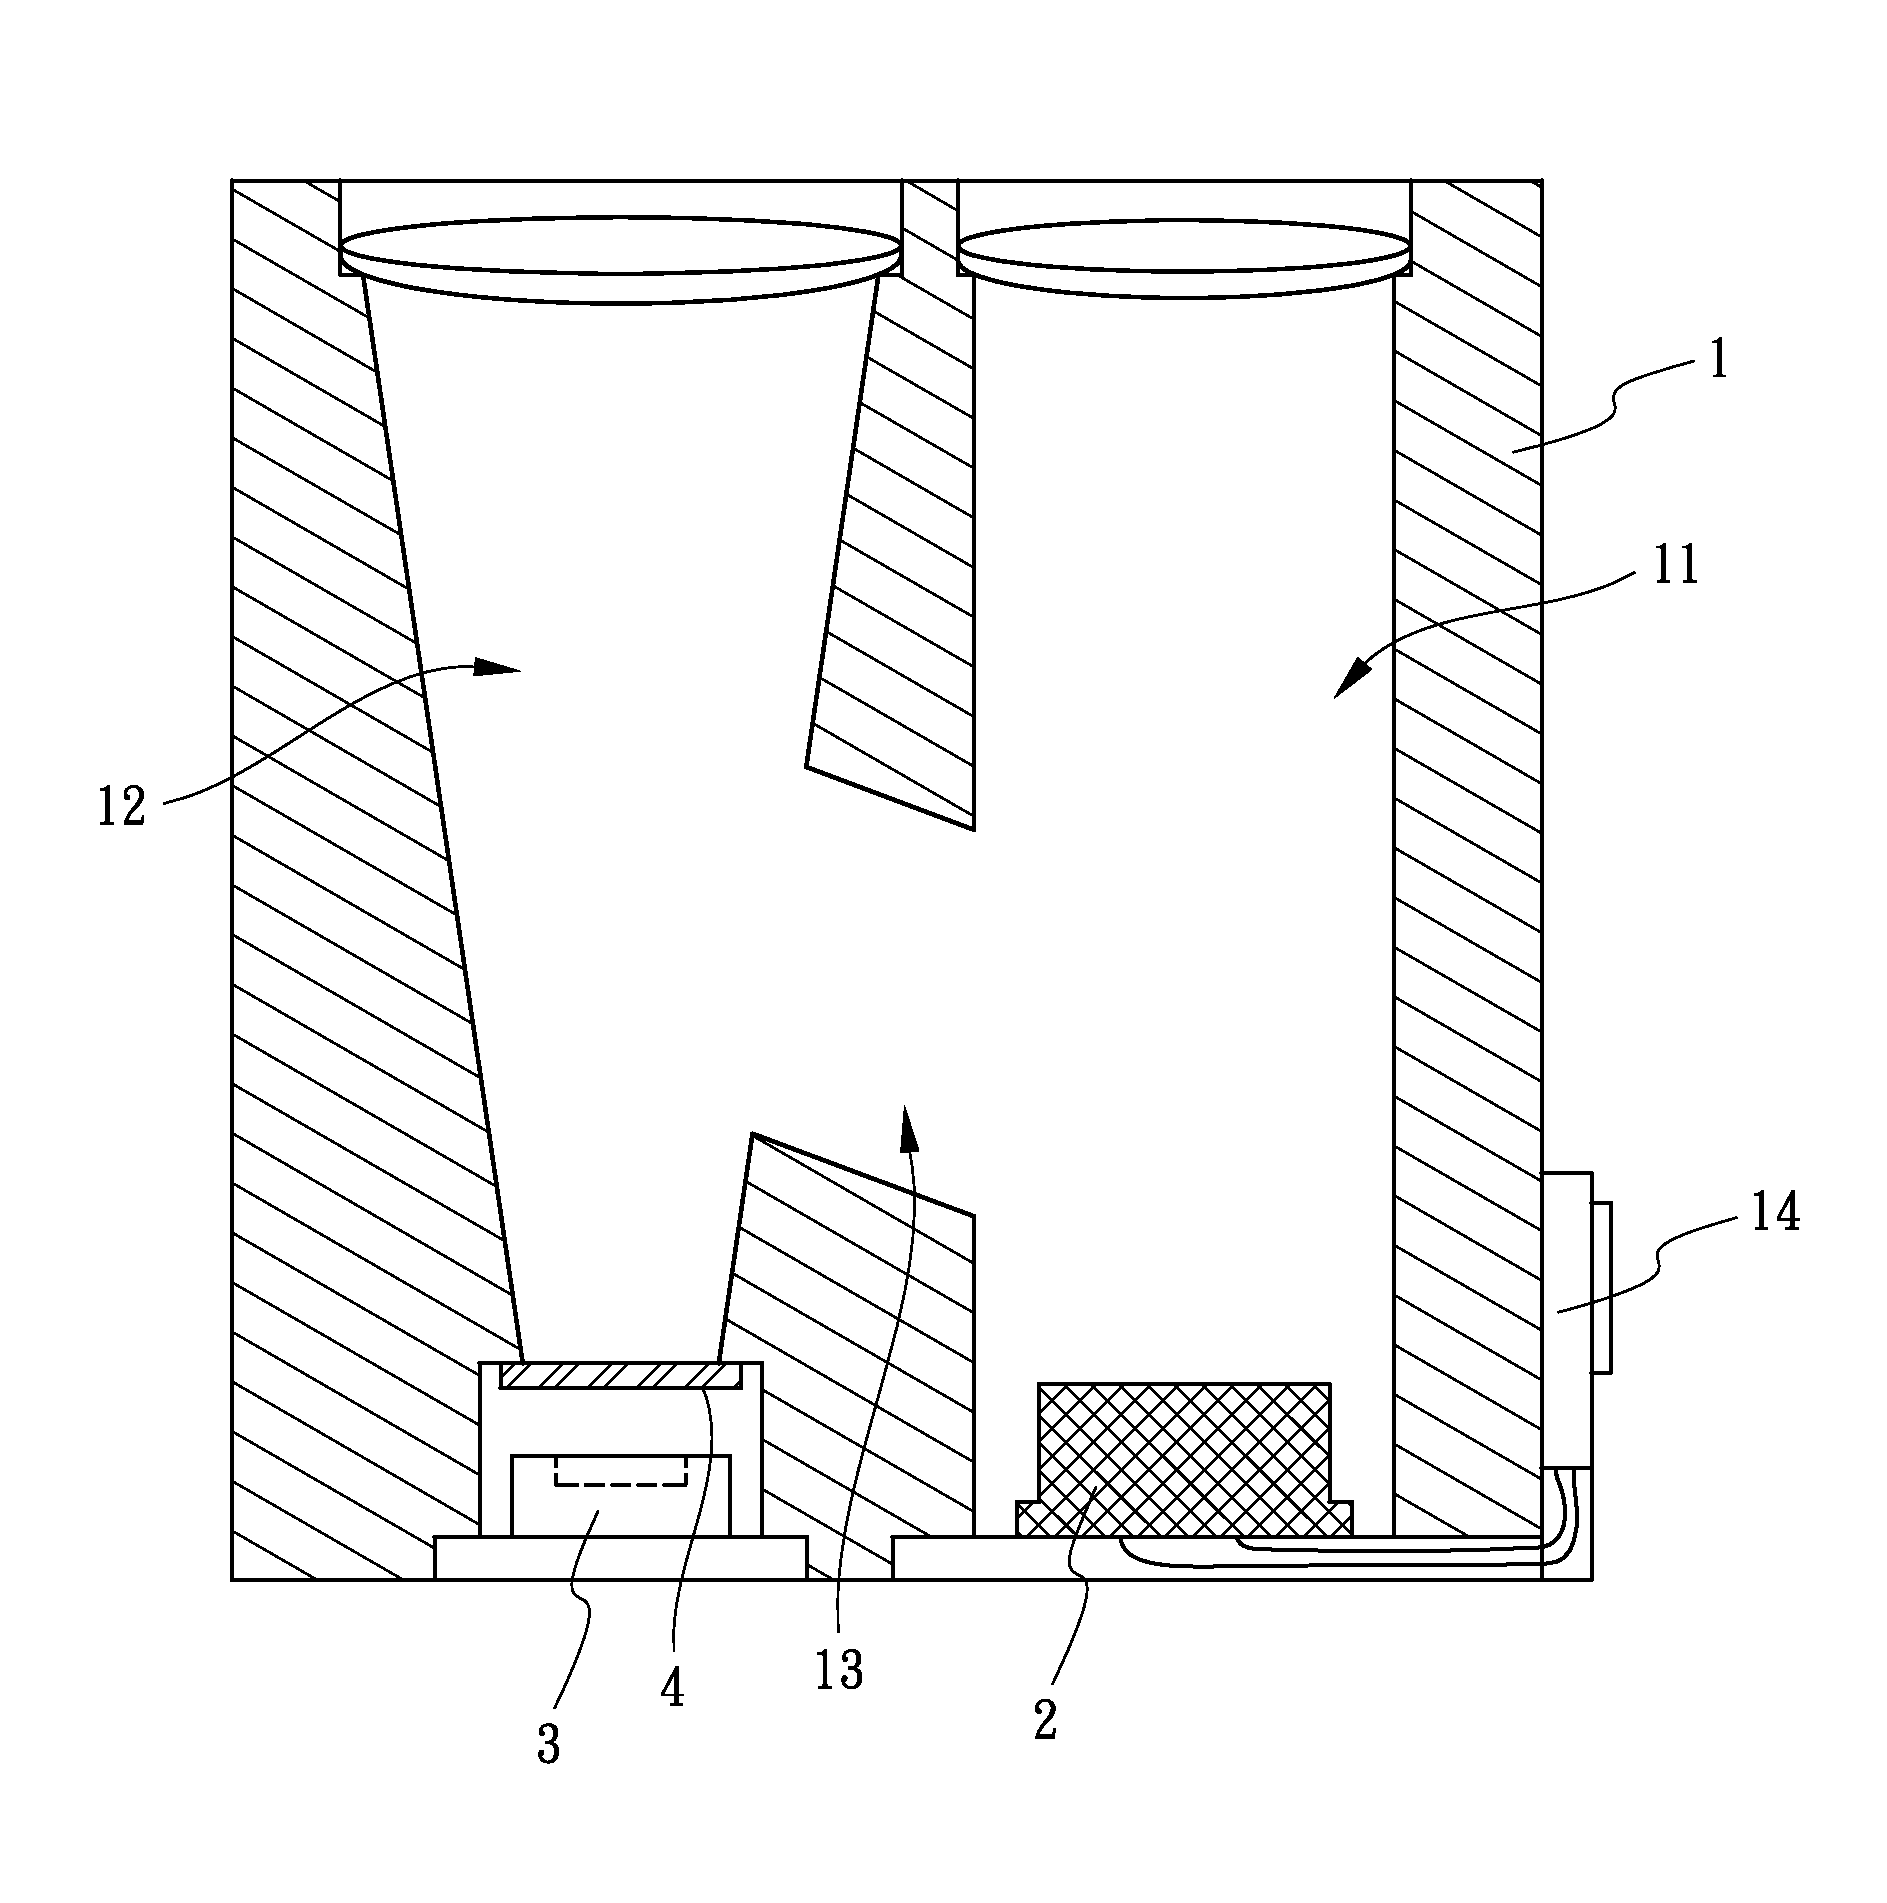 Structure of an optical path for laser range finding